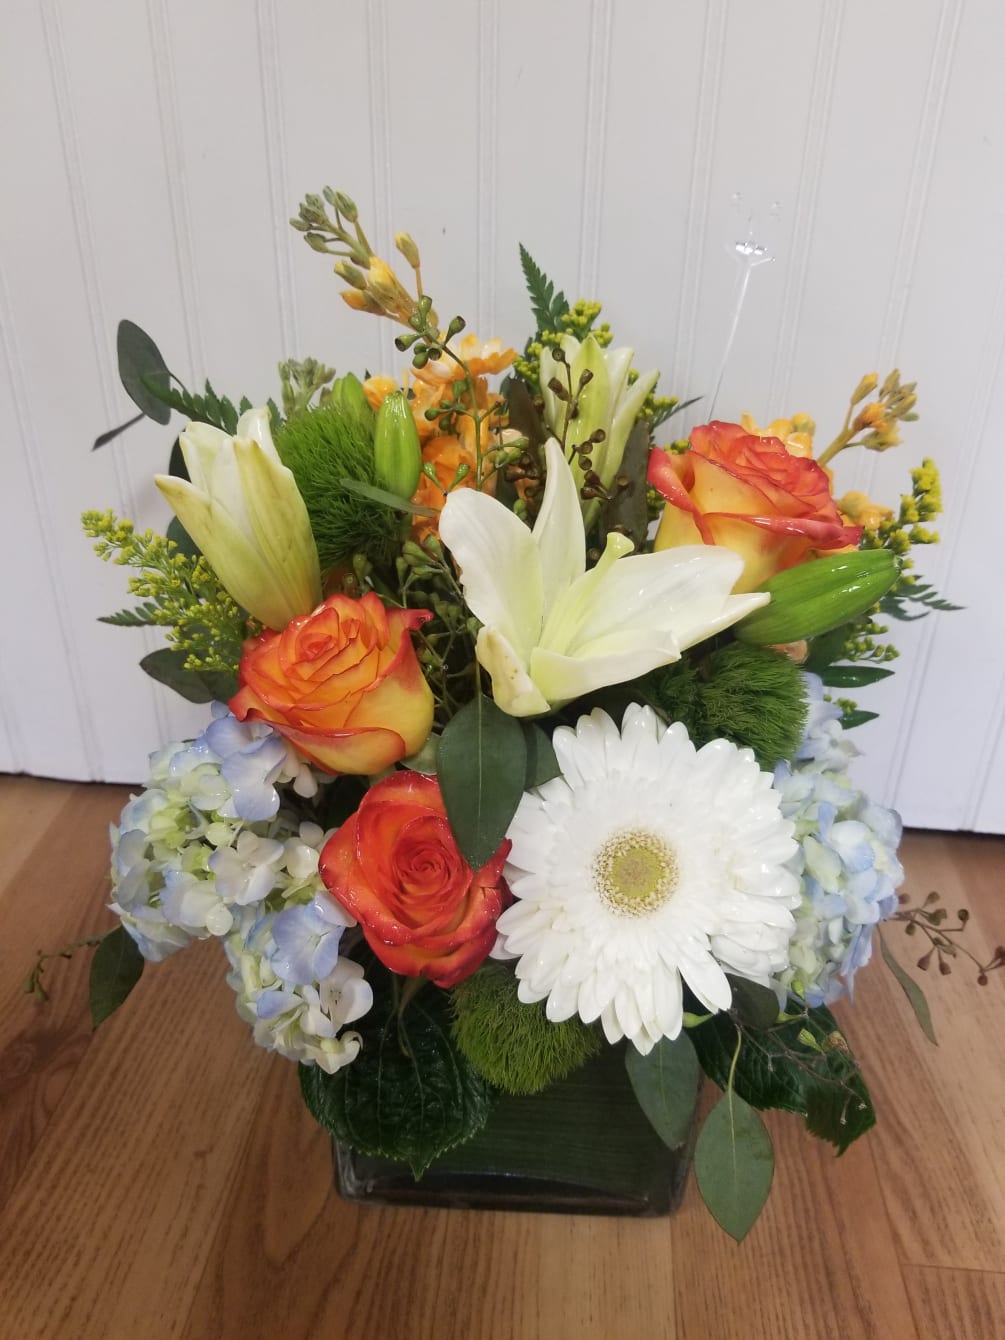 This lively summertime arrangement is great for all occasions. It contains lillies